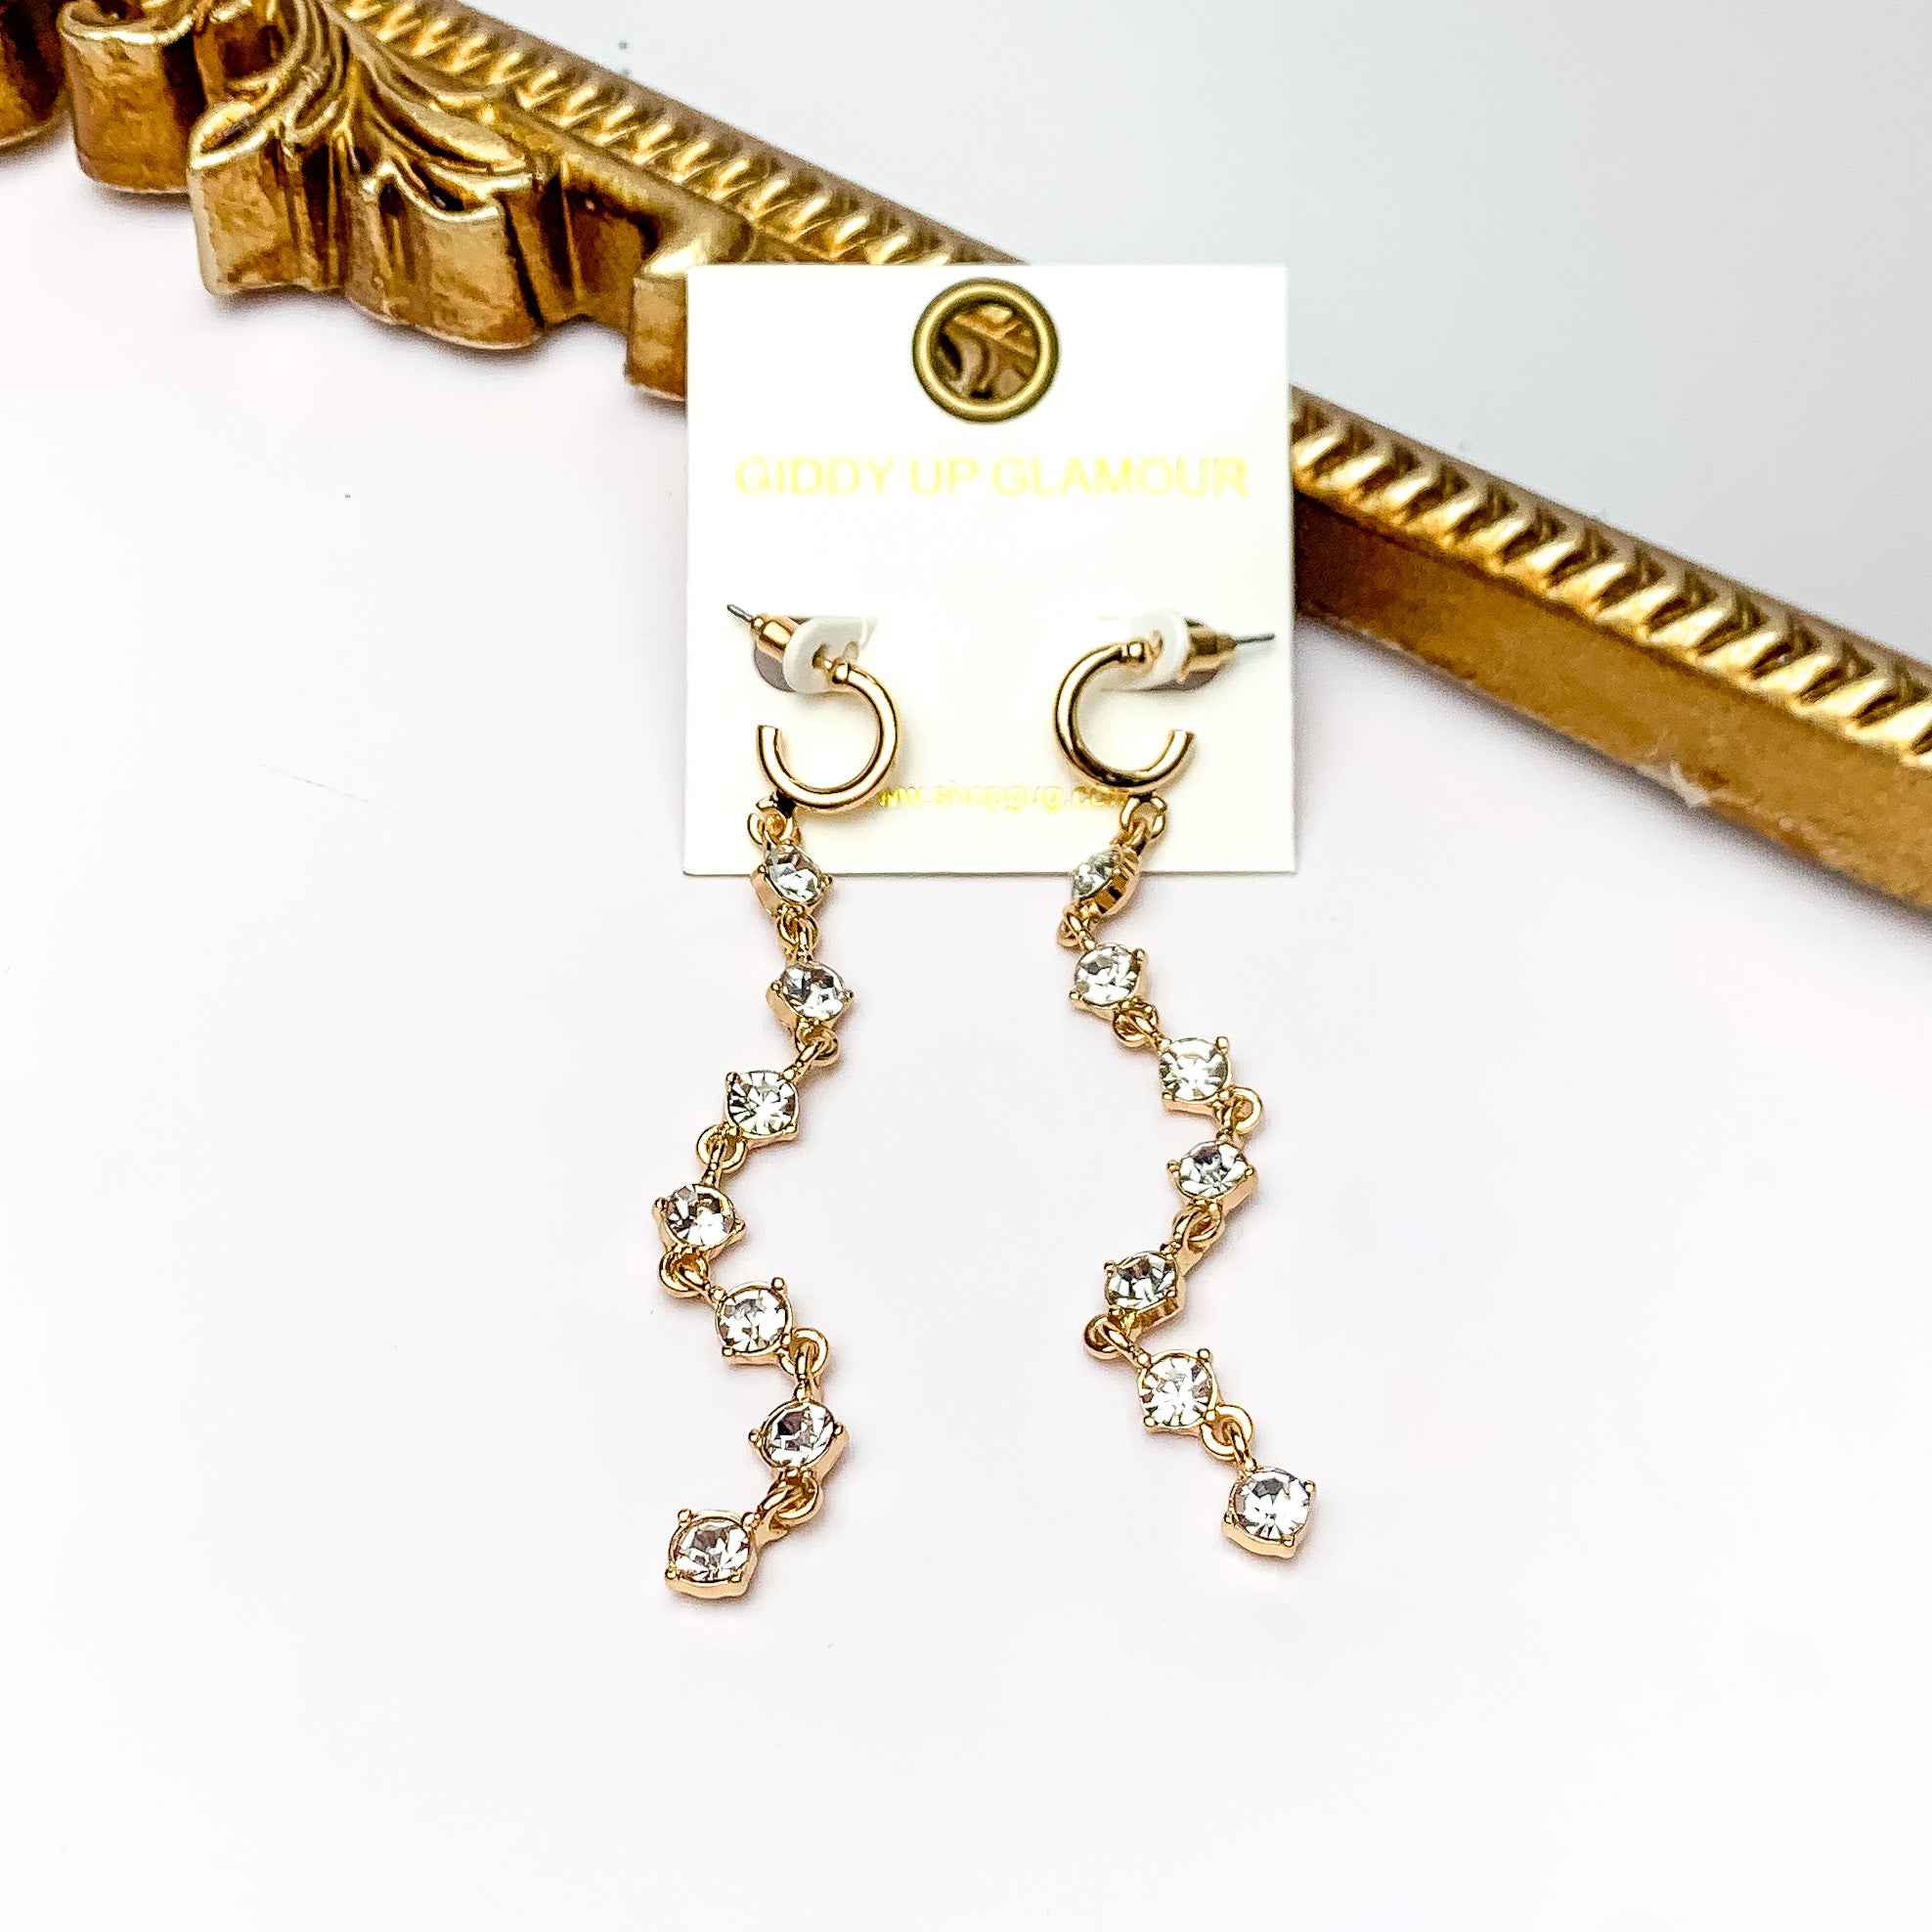 Red Carpet Moment Long Gold Tone Earrings With Clear Crystals. Pictured on a white background with a gold frame behind the earrings.